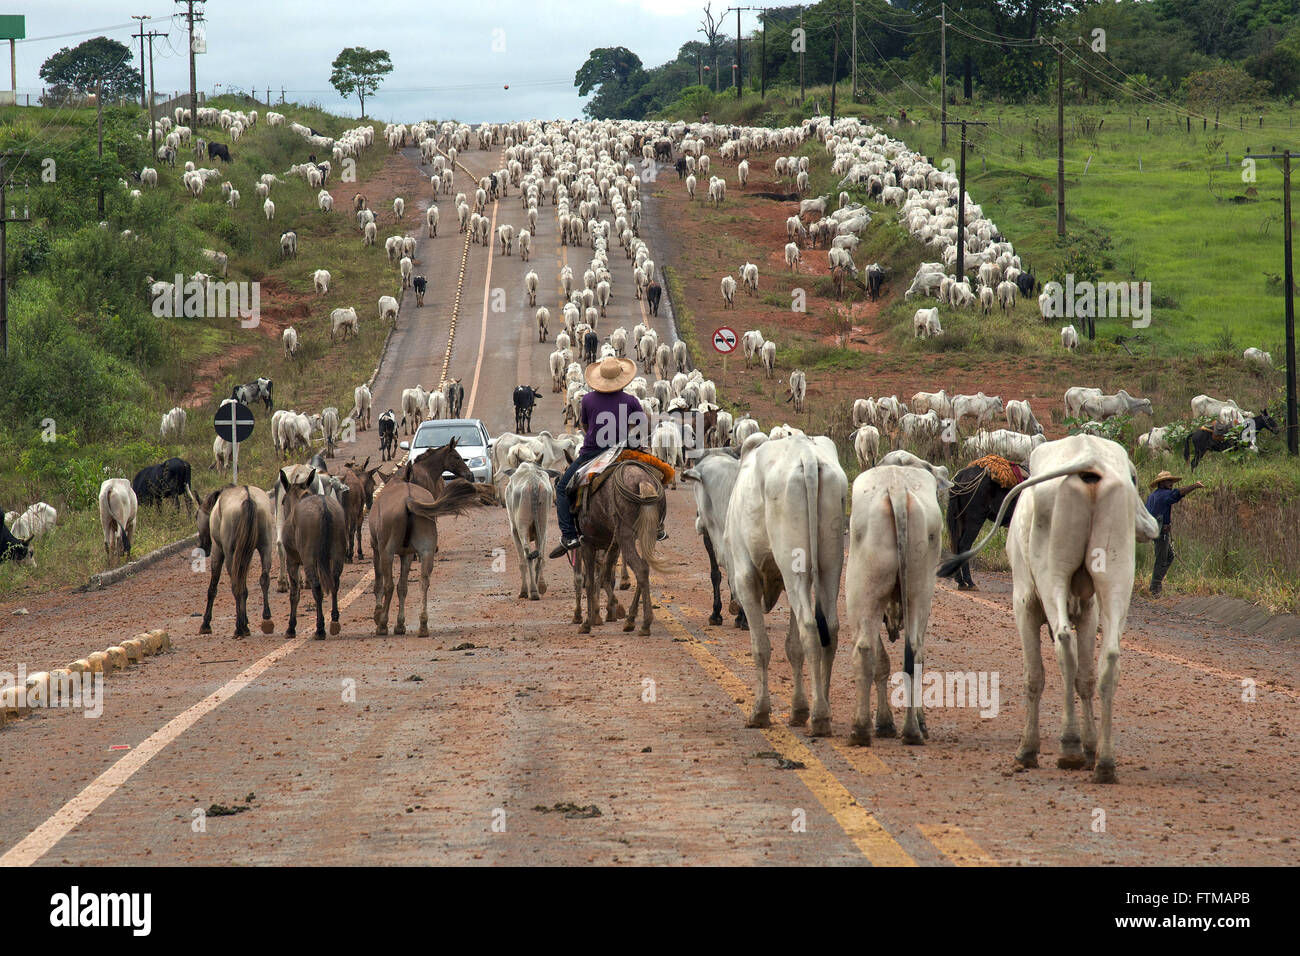 Entourage driving cattle in the MT-208 highway occupying the lanes of the road Stock Photo